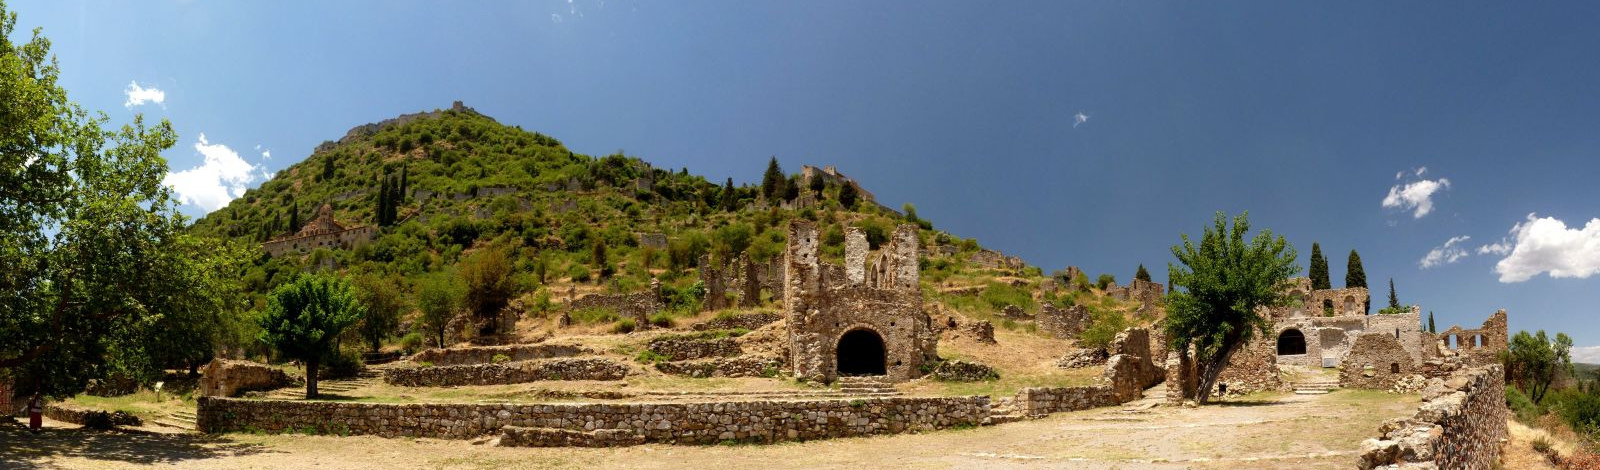 "Mystras - Lower City " by Ronny Siegel on Flickr (CC-BY-2.0)